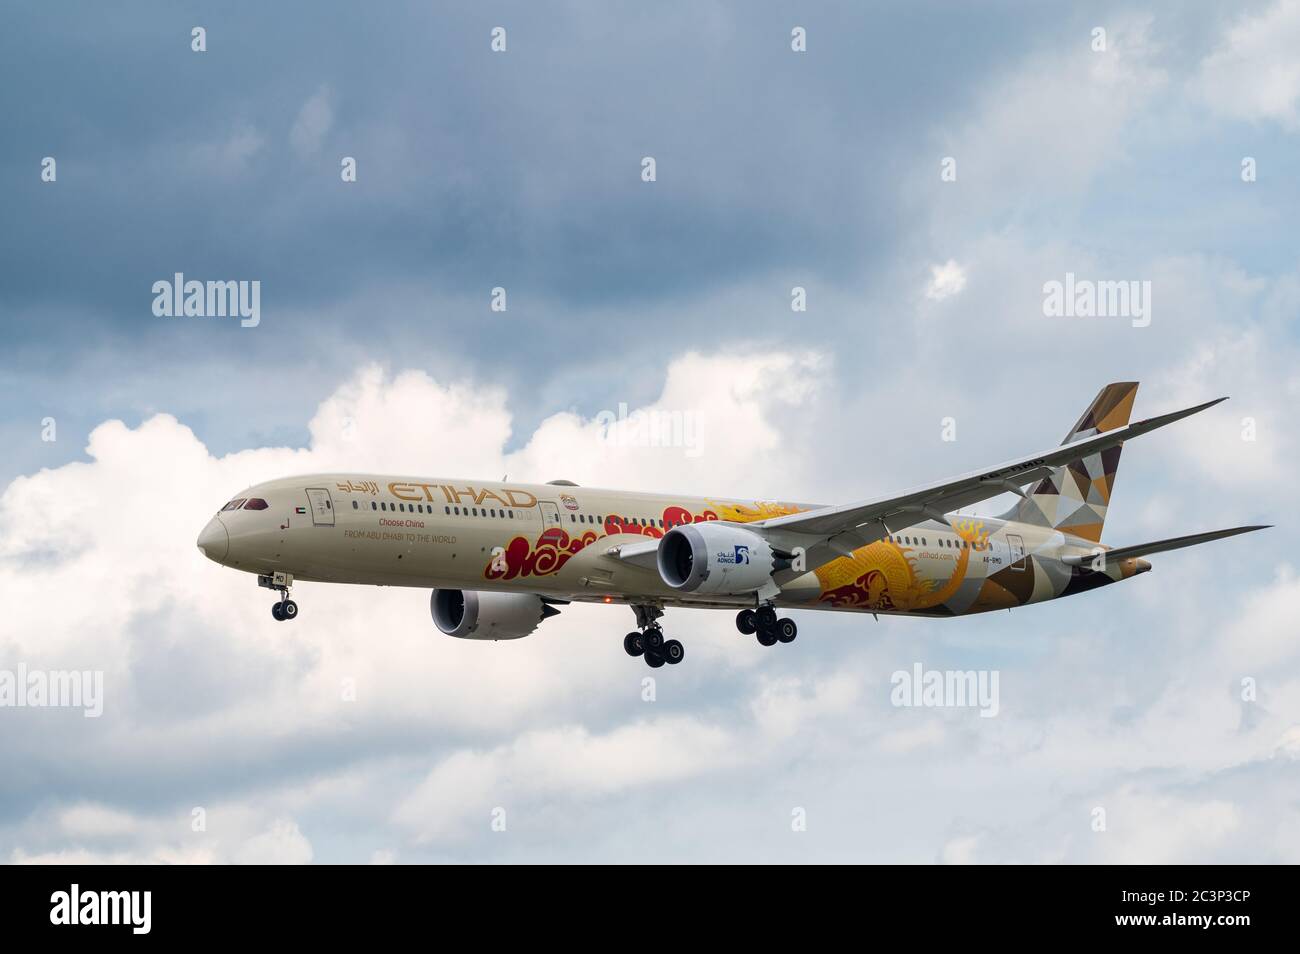 Etihad Airways Boeing 787-10 A6-0BMC aircraft with Chinese dragon scheme approaching to land at Frankfurt Airport in Germany Stock Photo